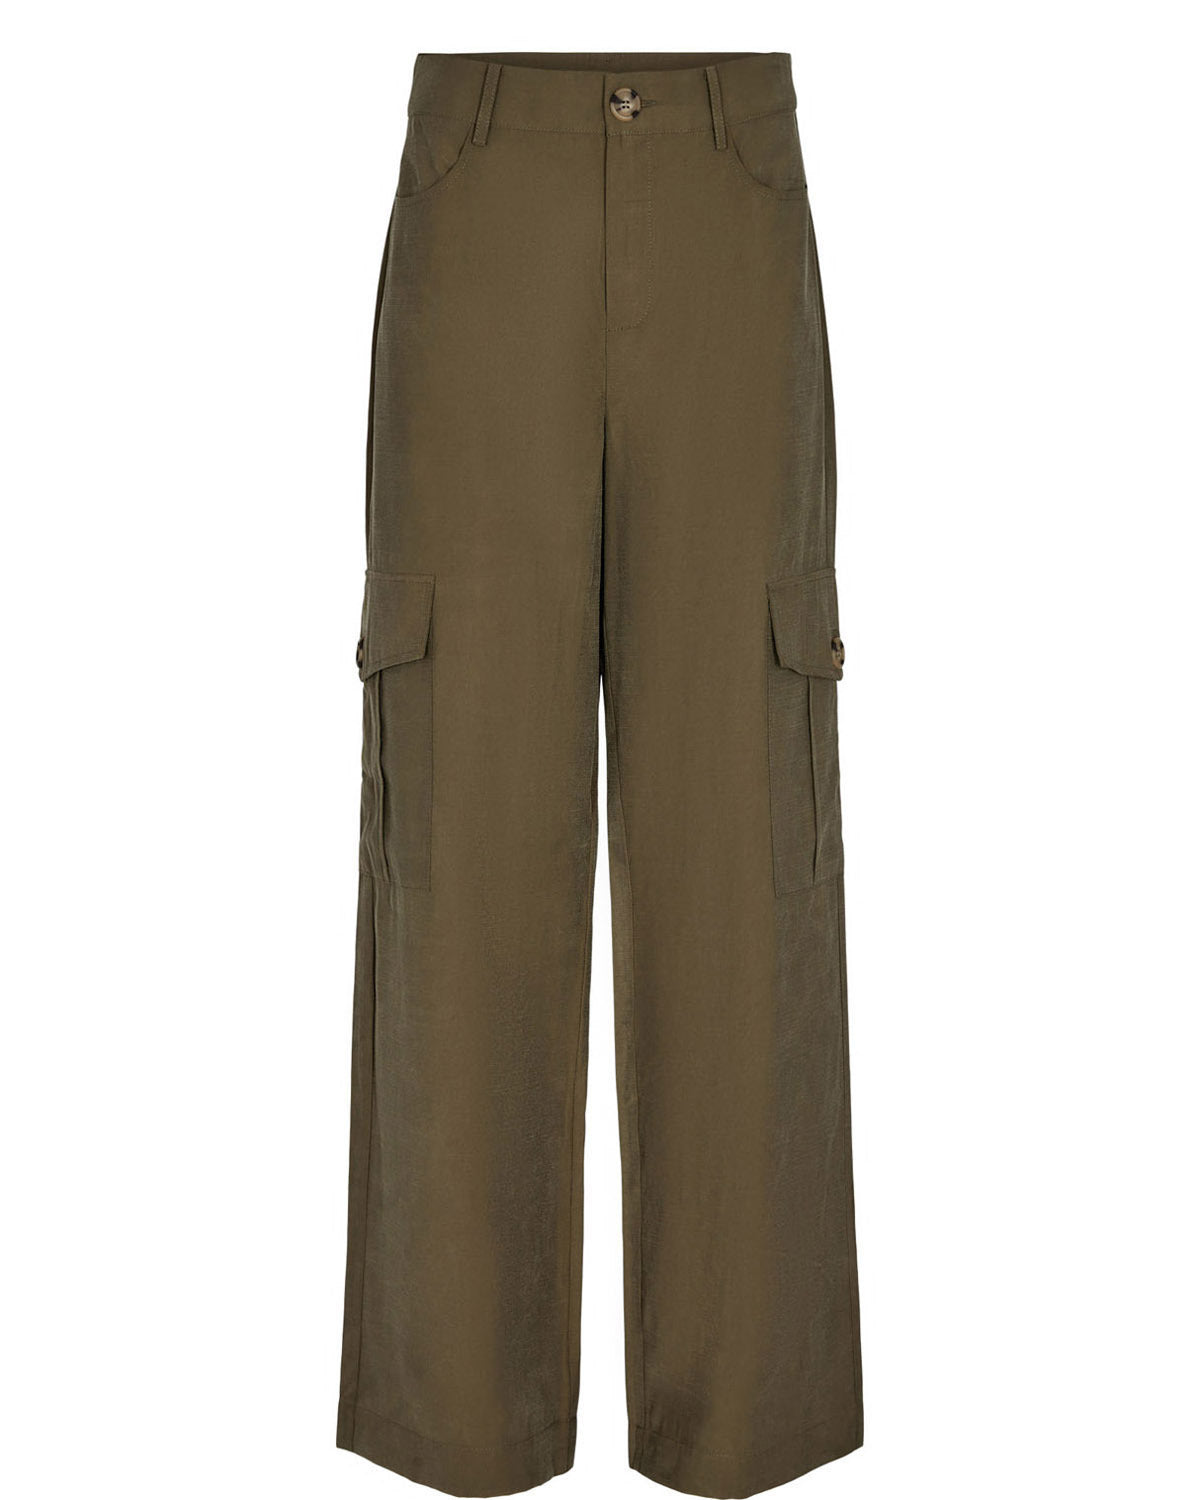 Numph Nuwaleria Pants in Ivy Green - loose fit and drapey with cargo pockets